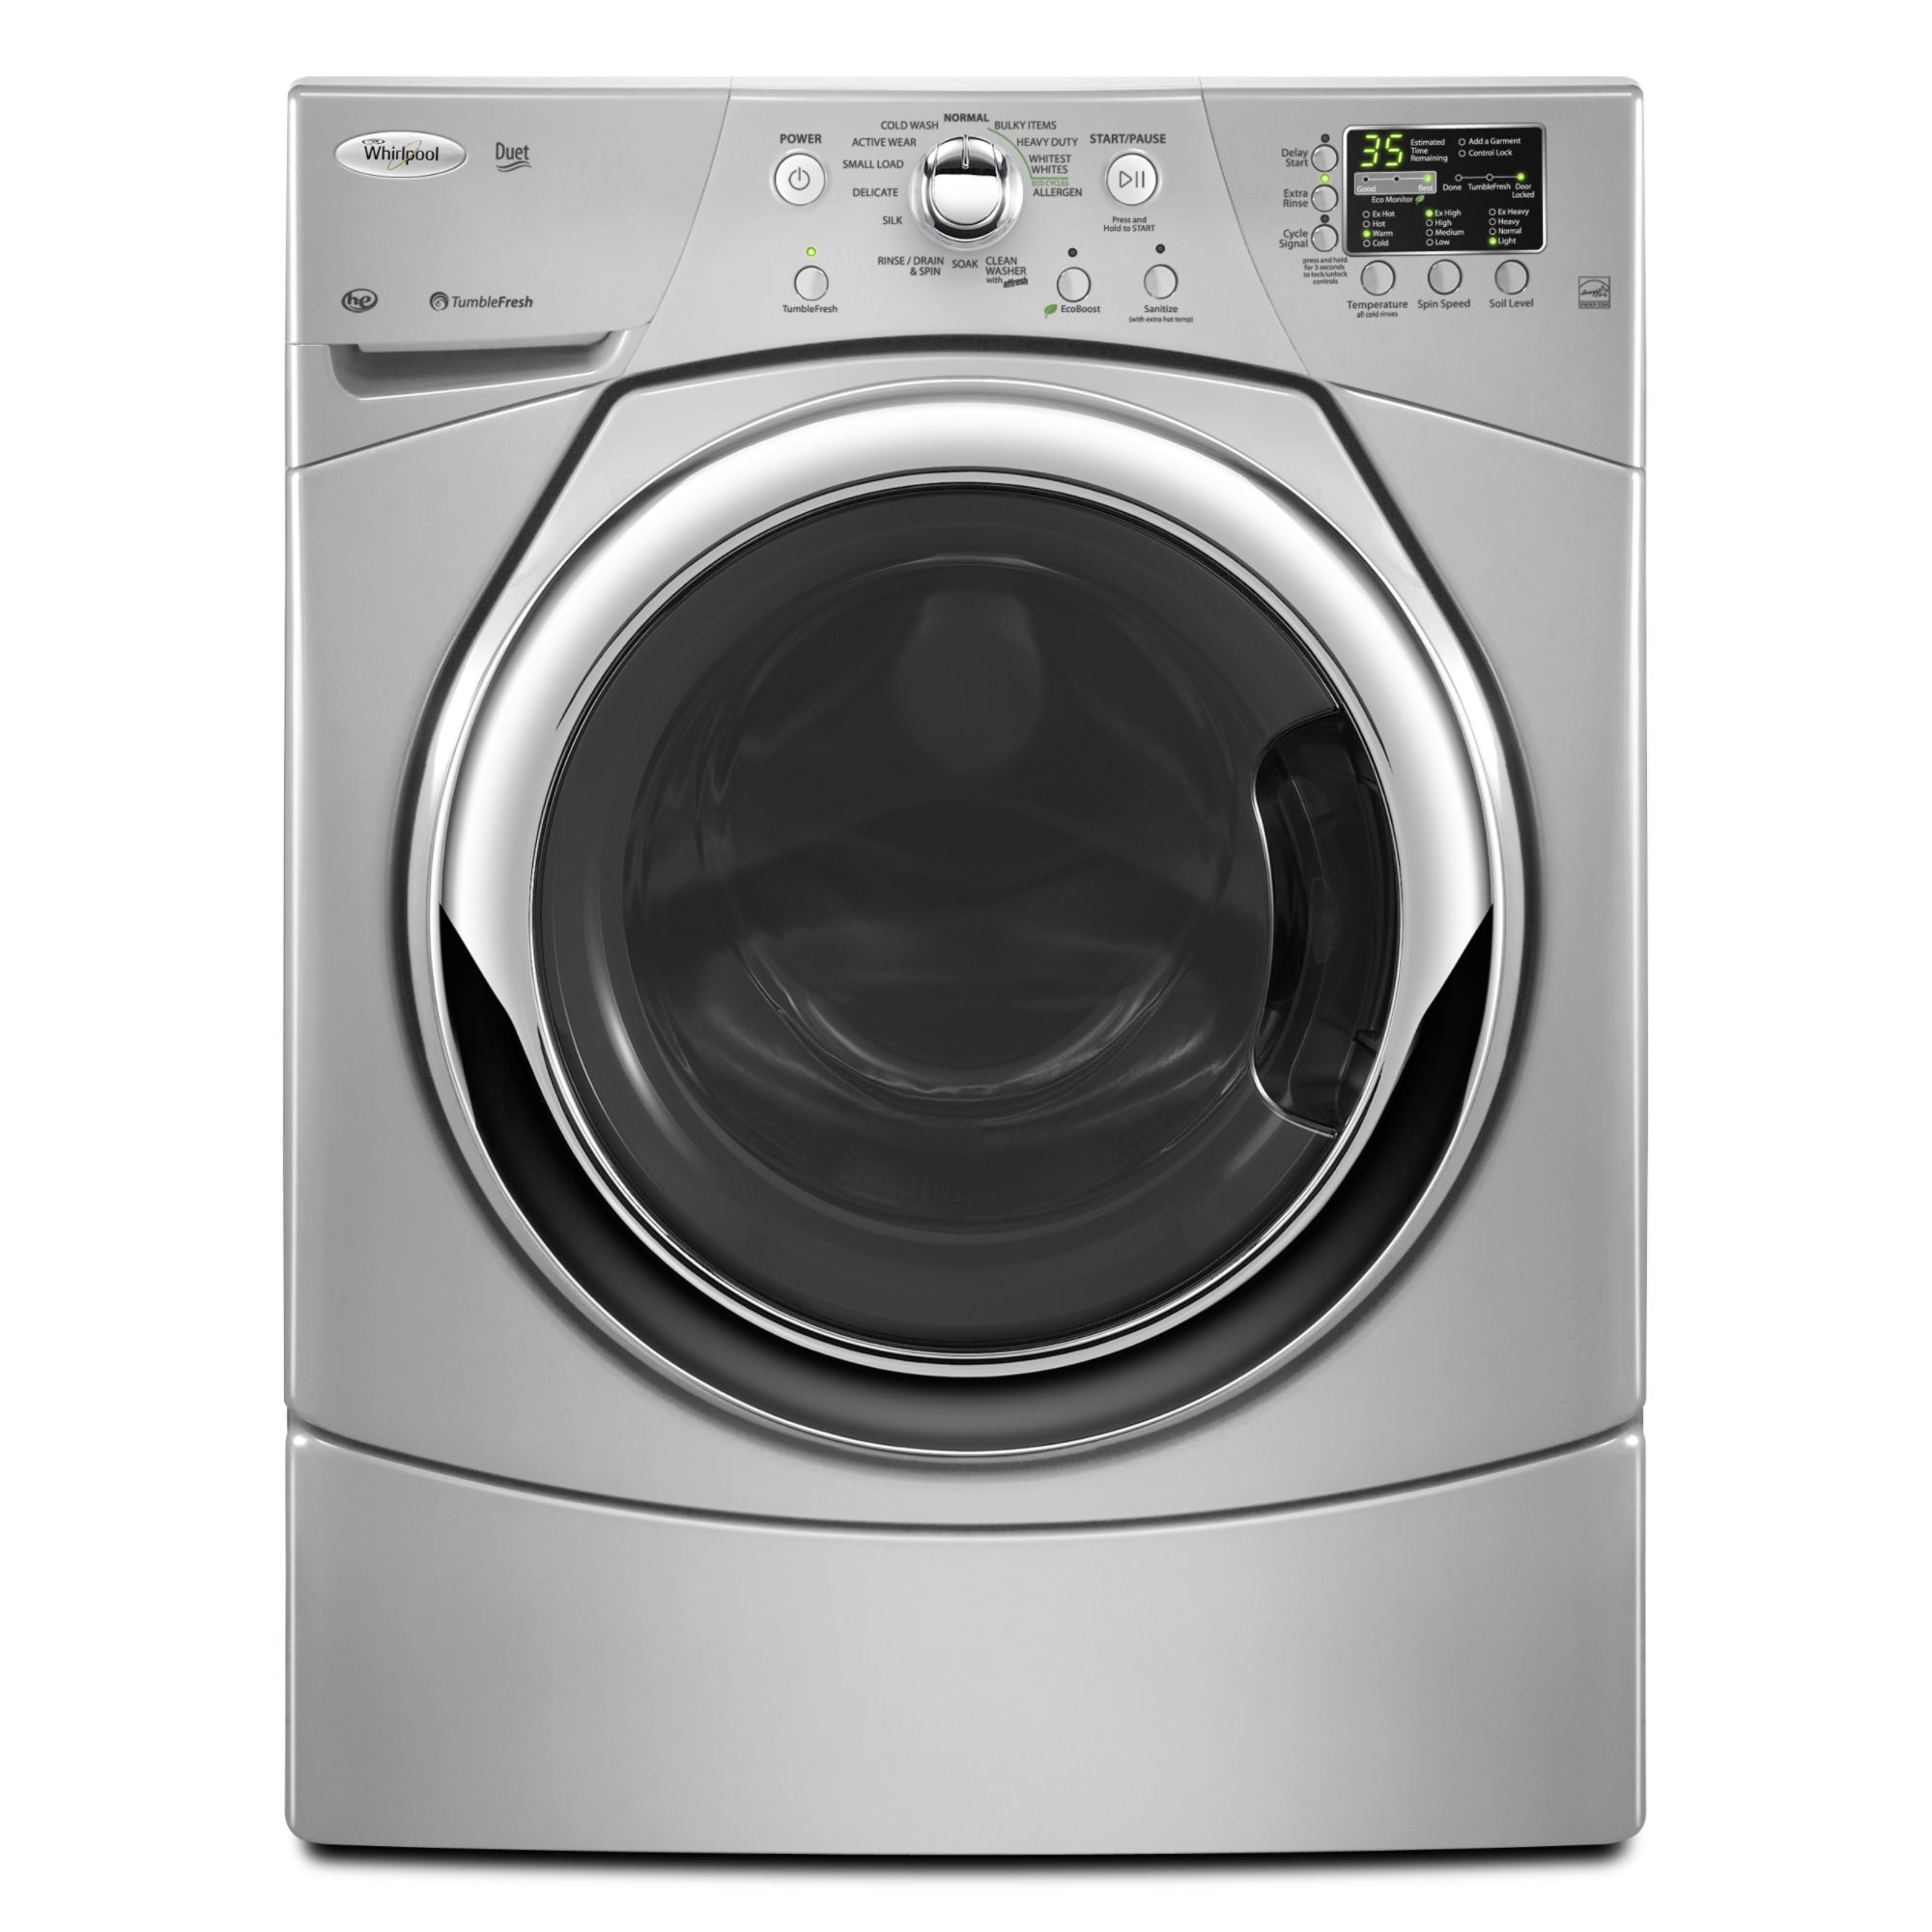 Whirlpool 3.5 cu. ft. Front-Load Washer w/ NSF Certified Allergen Cycle